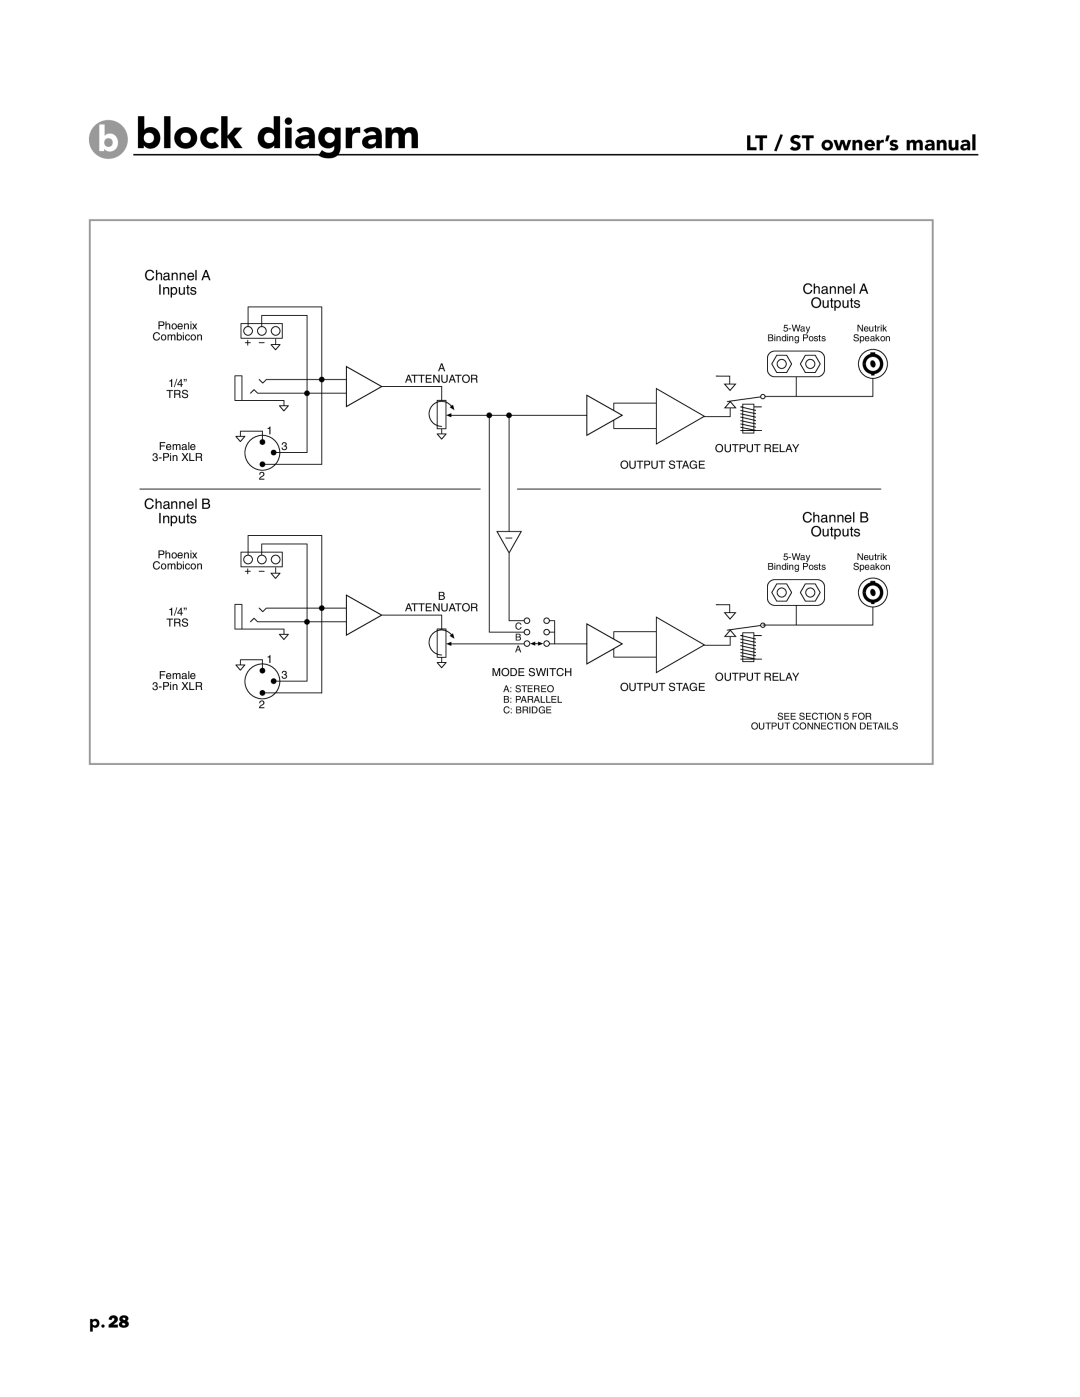 Peavey ST Series, LT Series owner manual b block diagram, p.28, Channel A, Inputs, Outputs, Channel B 